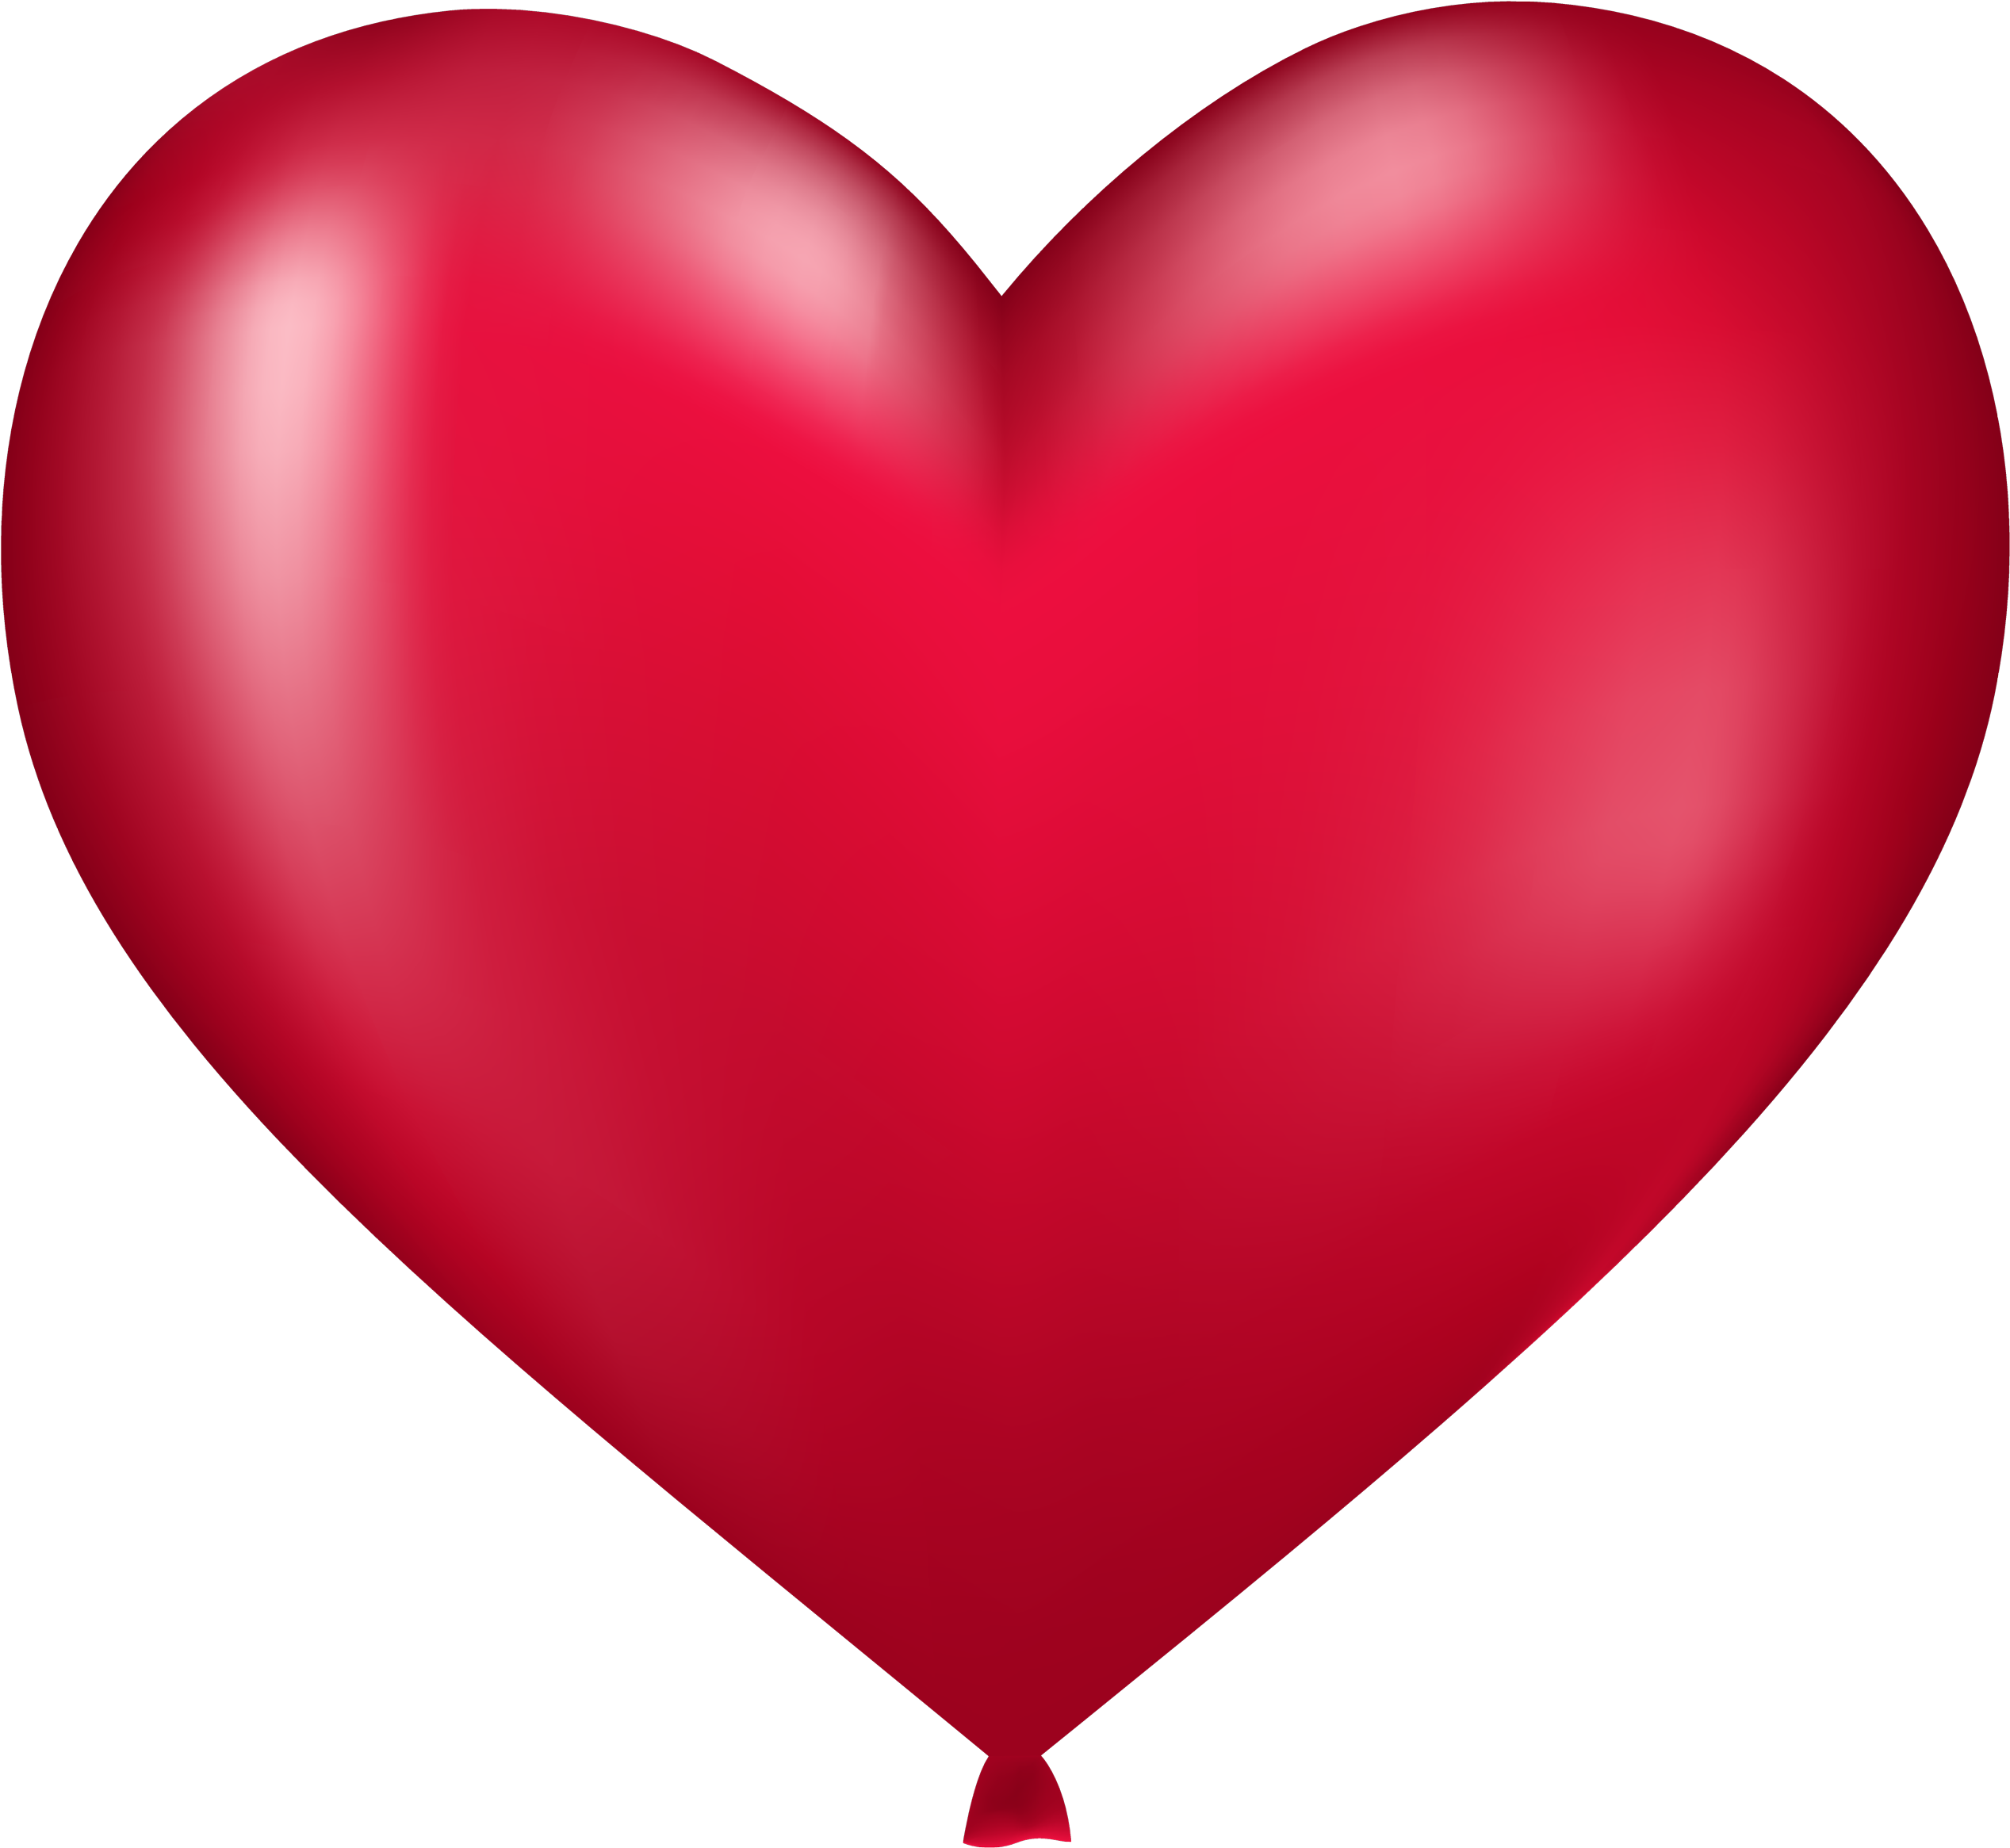 Heart Balloon PNG High Quality Image